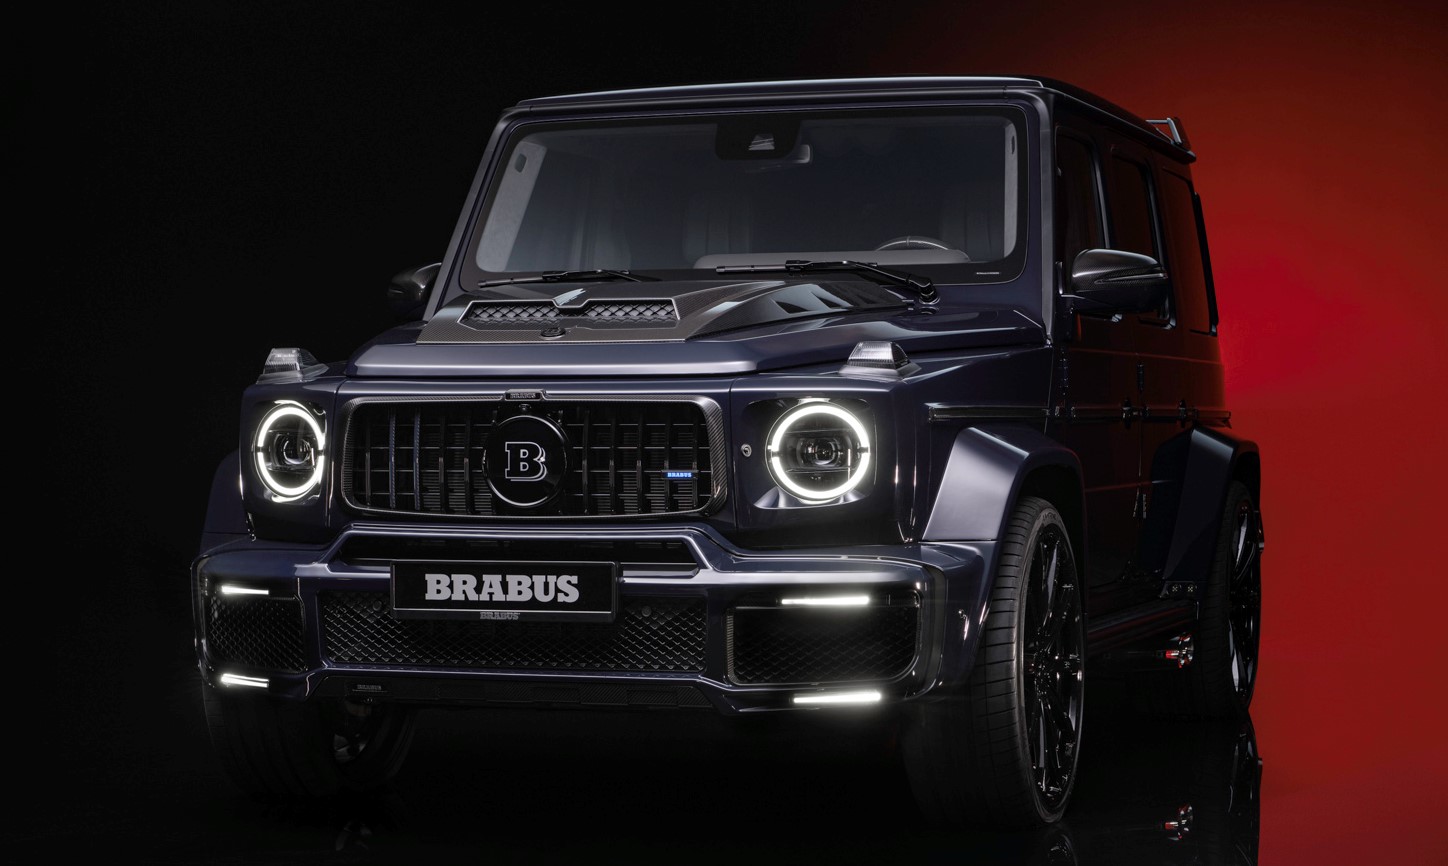 BRABUS DEEP BLUE Statement - A SUV, Super Boat And Watch